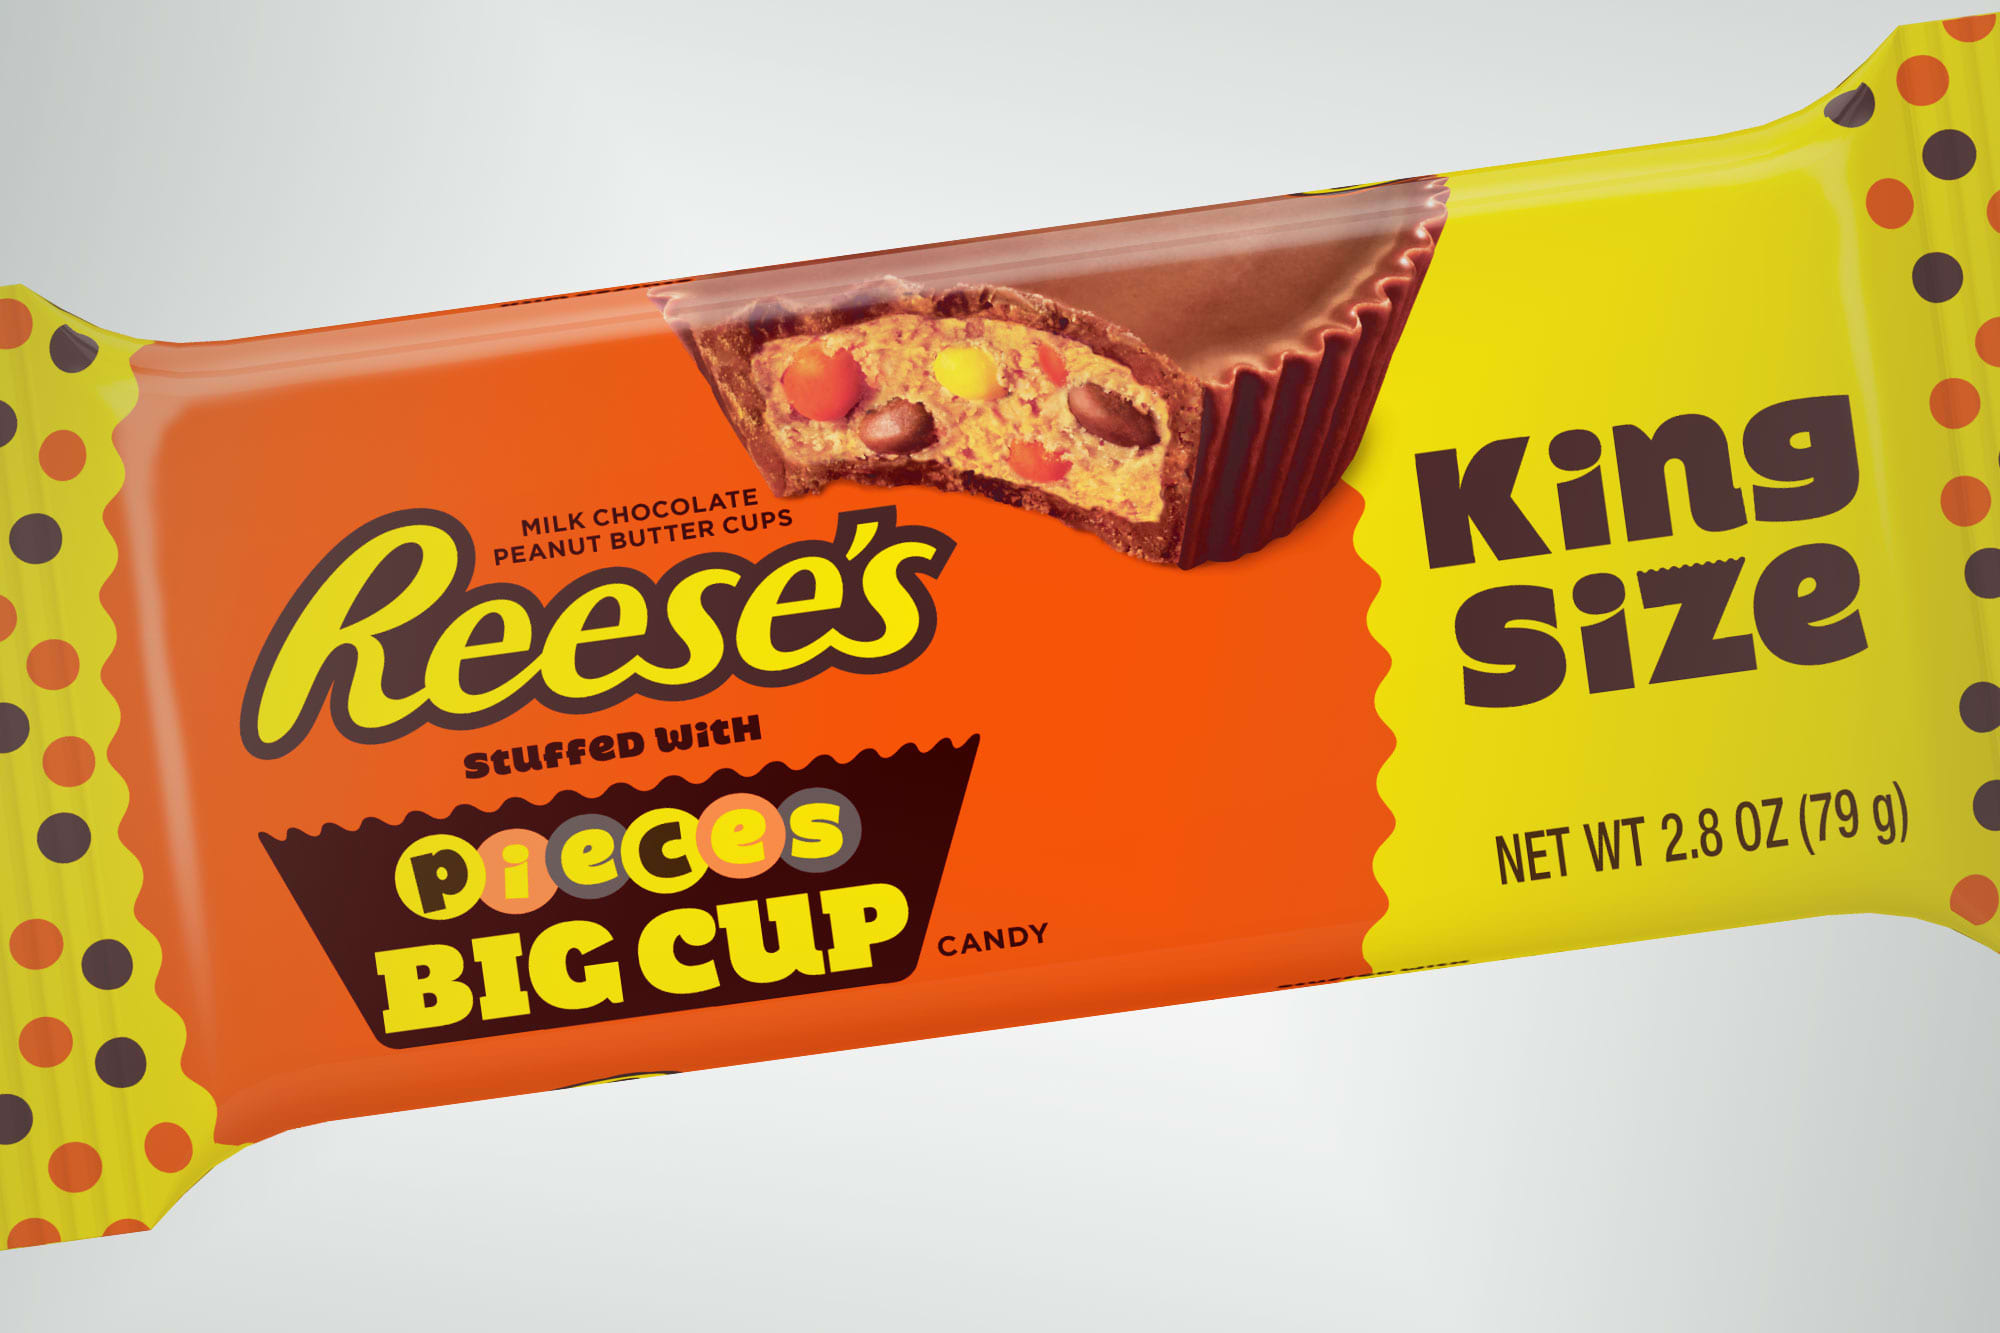 Reese's Pieces filled peanut butter cups soon in stores